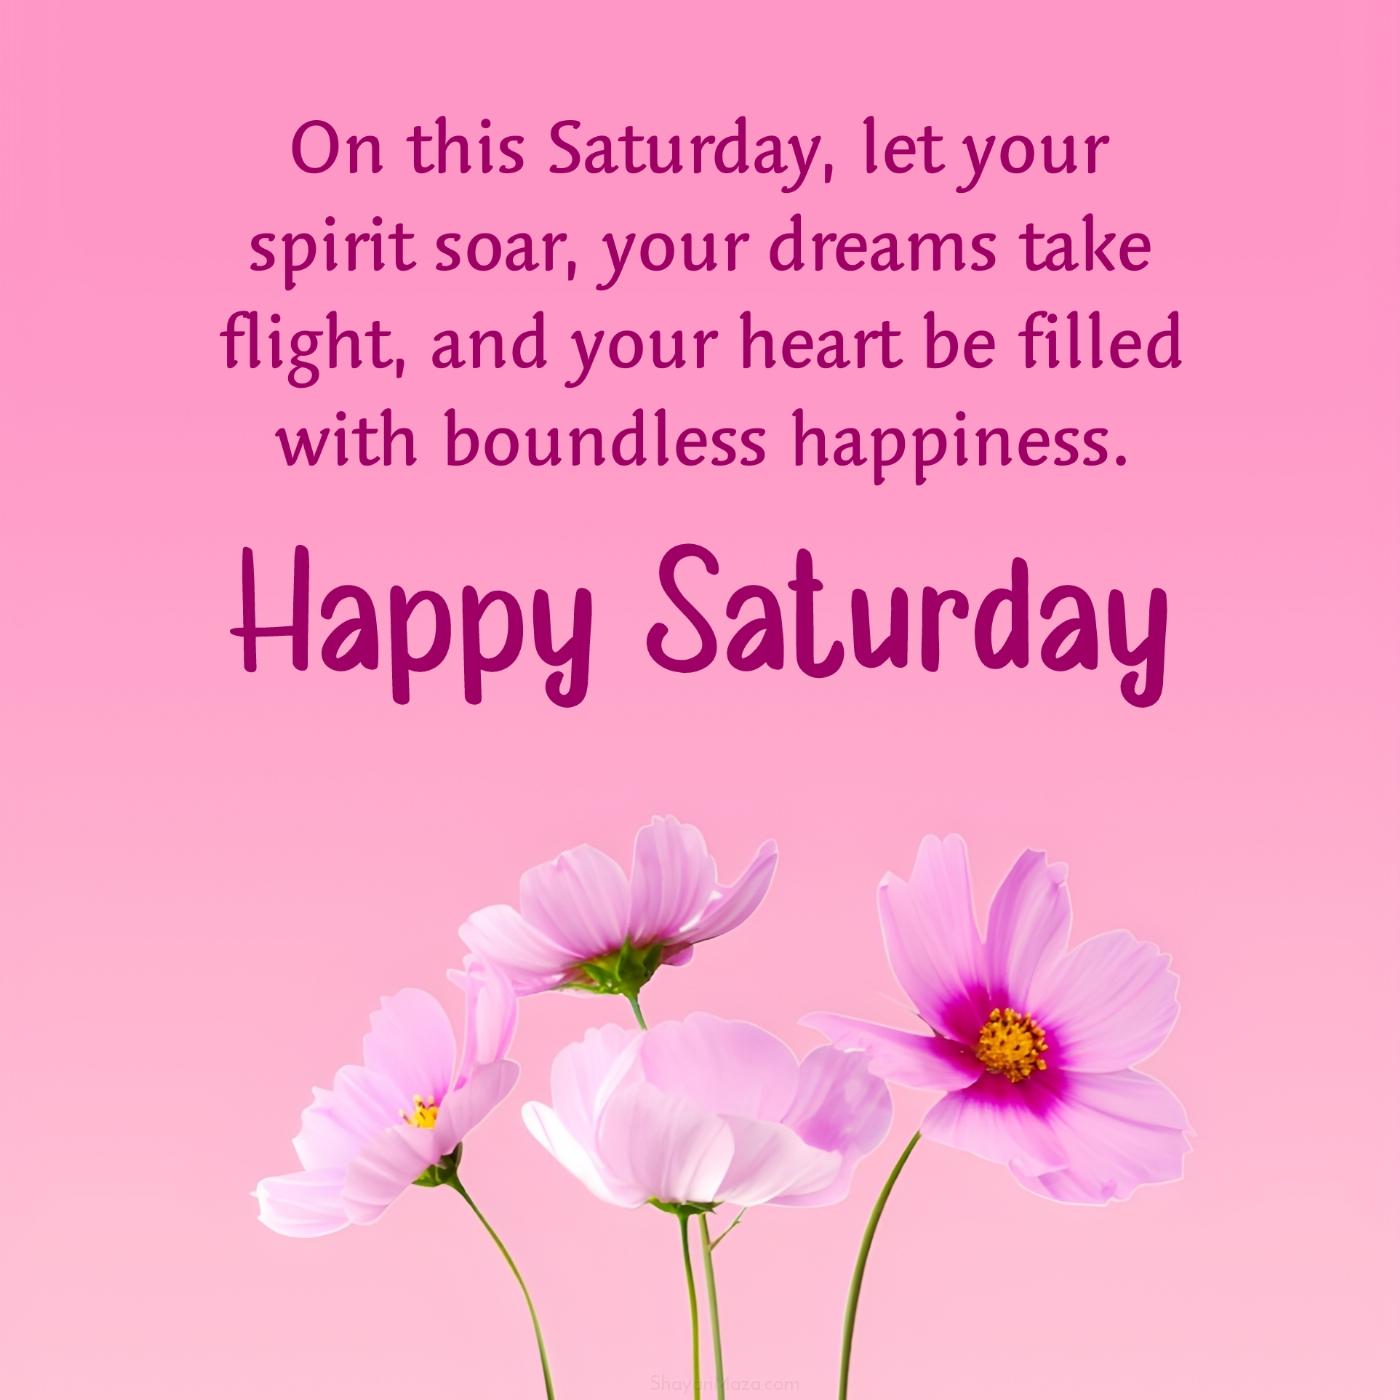 On this Saturday let your spirit soar your dreams take flight